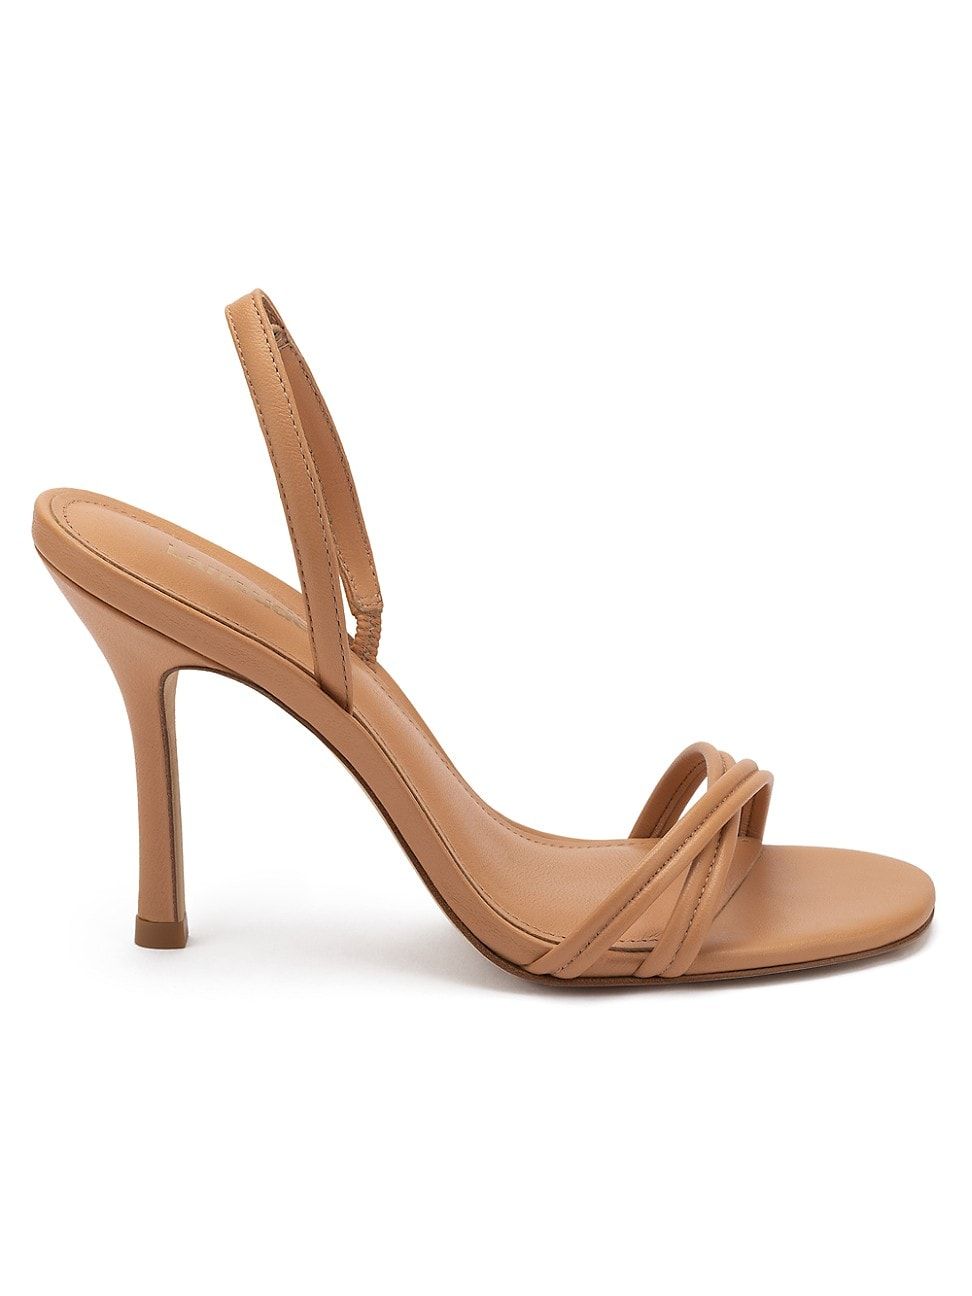 Women's Annie Leather High-Heel Sandals - Tan - Size 8.5 | Saks Fifth Avenue